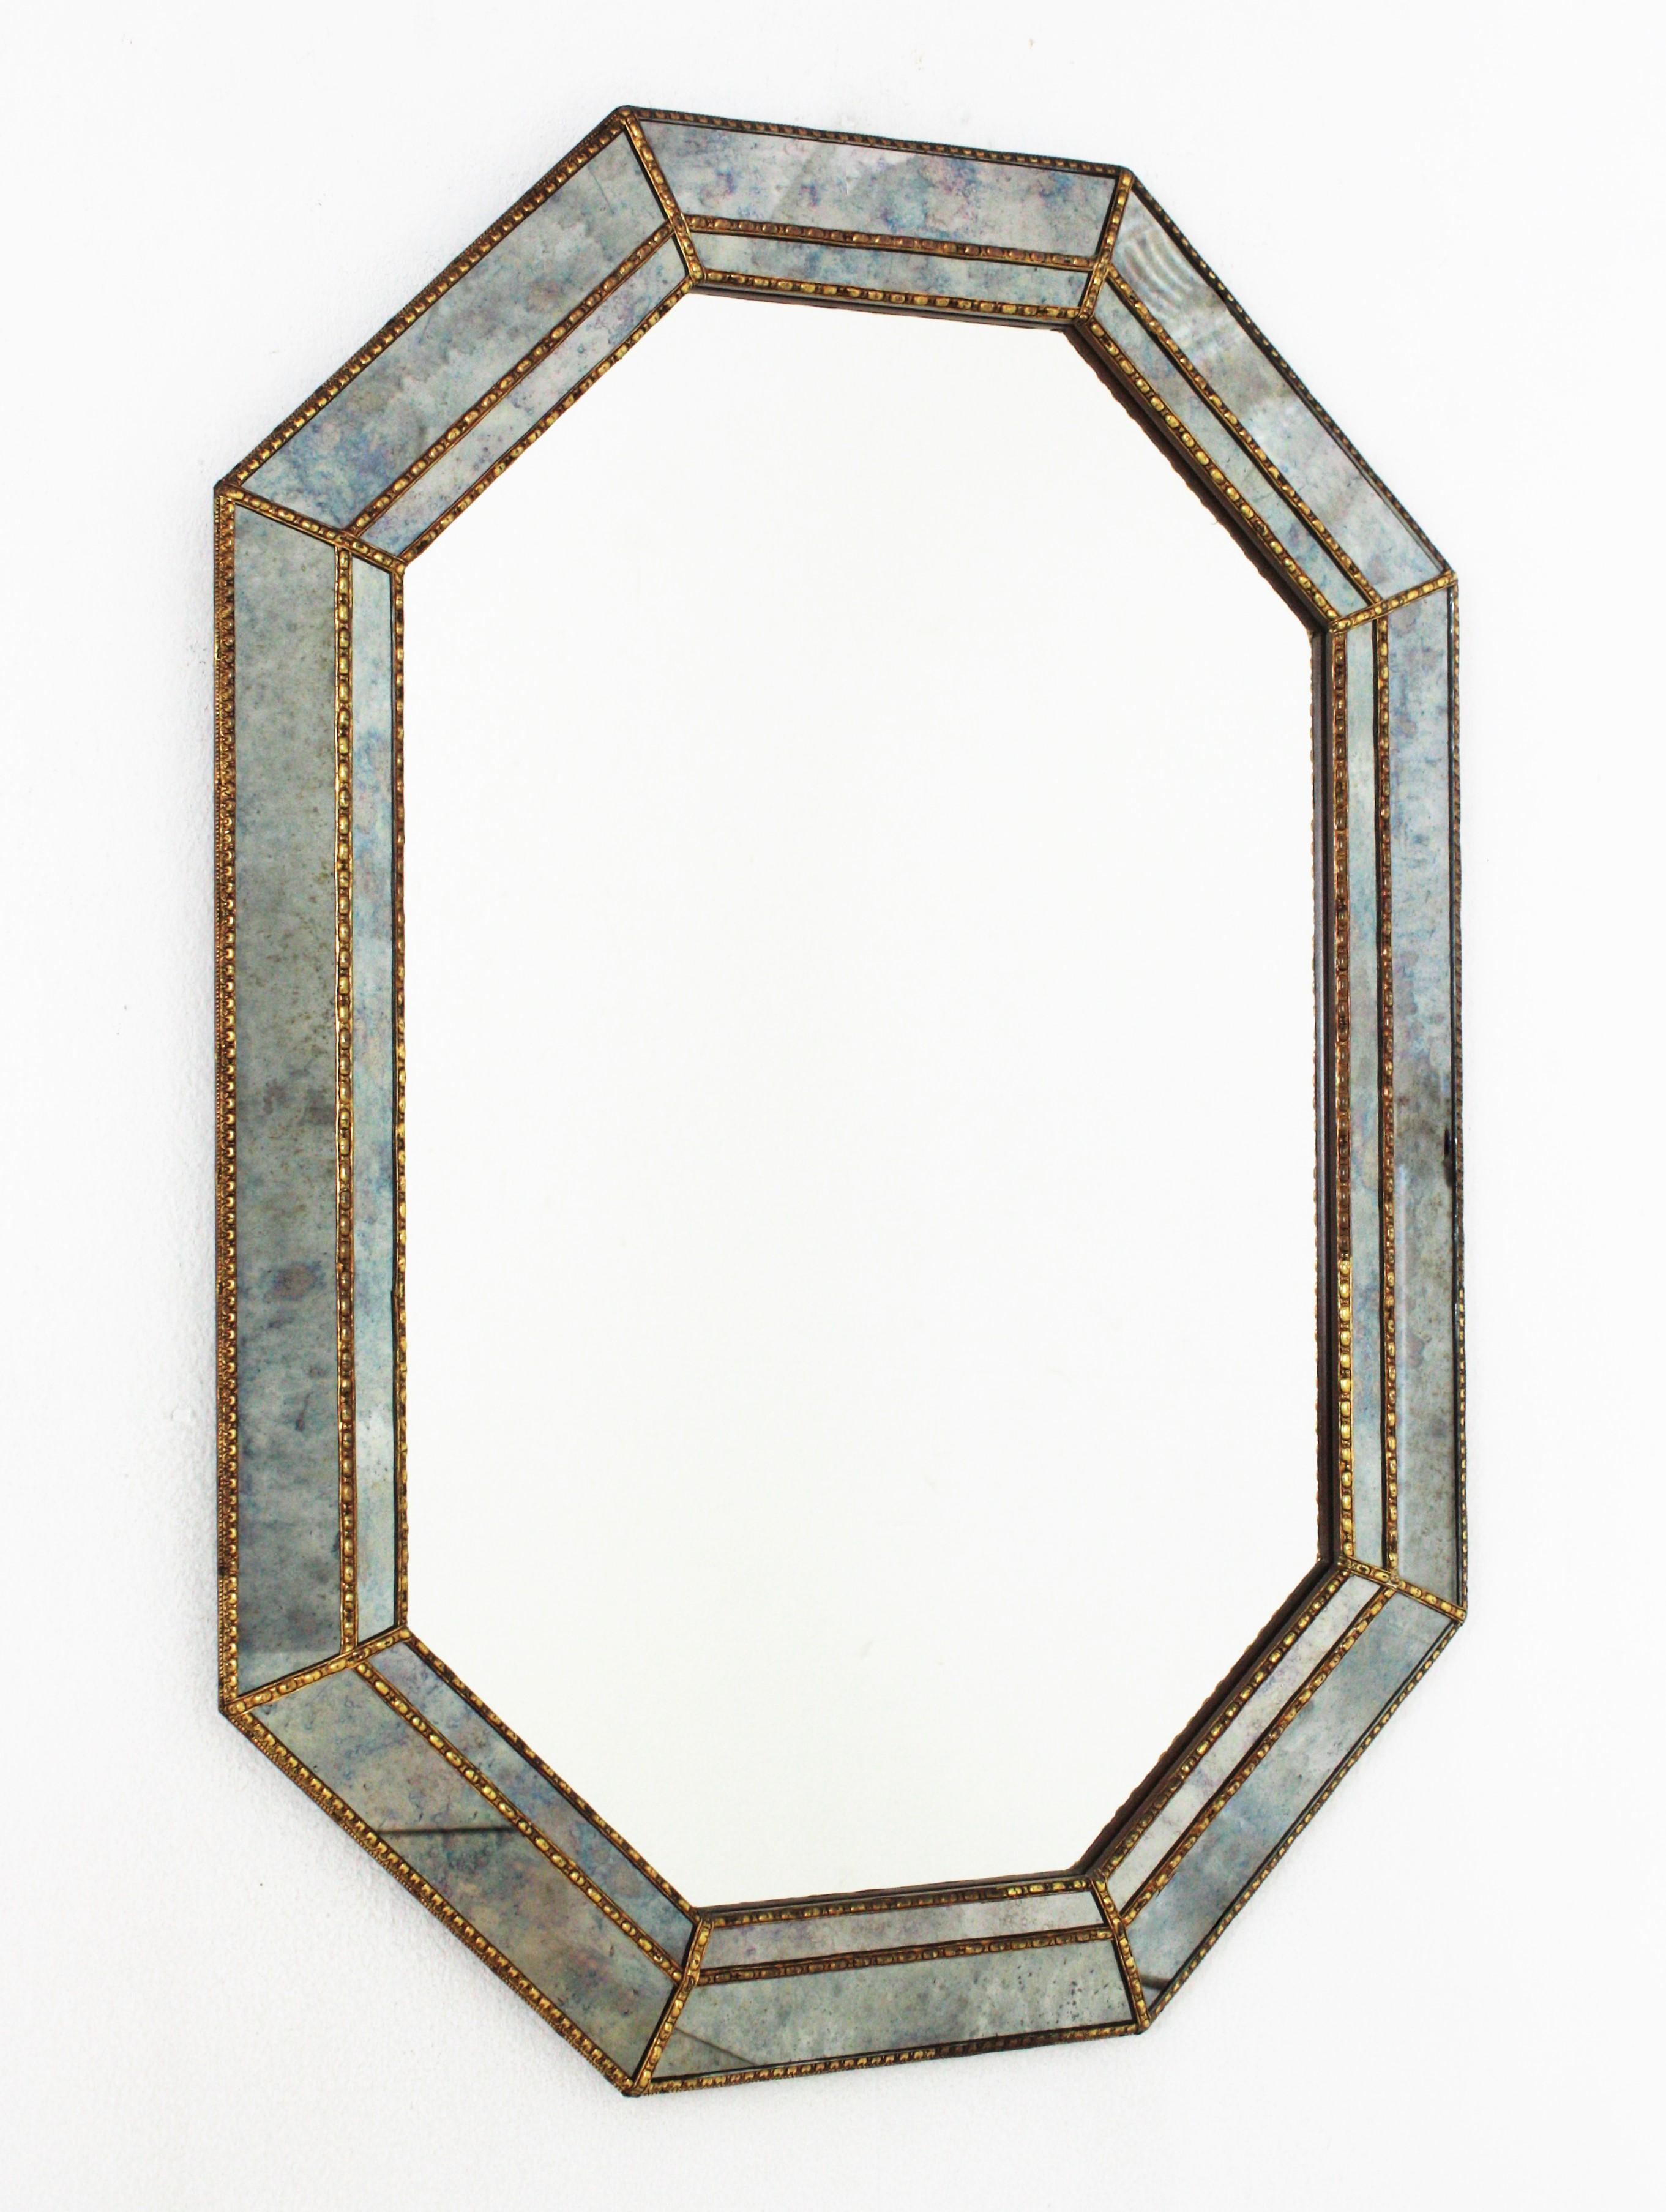 Cool Venetian Modern octagonal mirror with blue iridiscent mirror glass panels. Spain, 1960s
Glamorous mirror featuring a double layered mirror frame made of brass. Octagonal form with a frame that has two layers of decorative paneled mirrors. Both